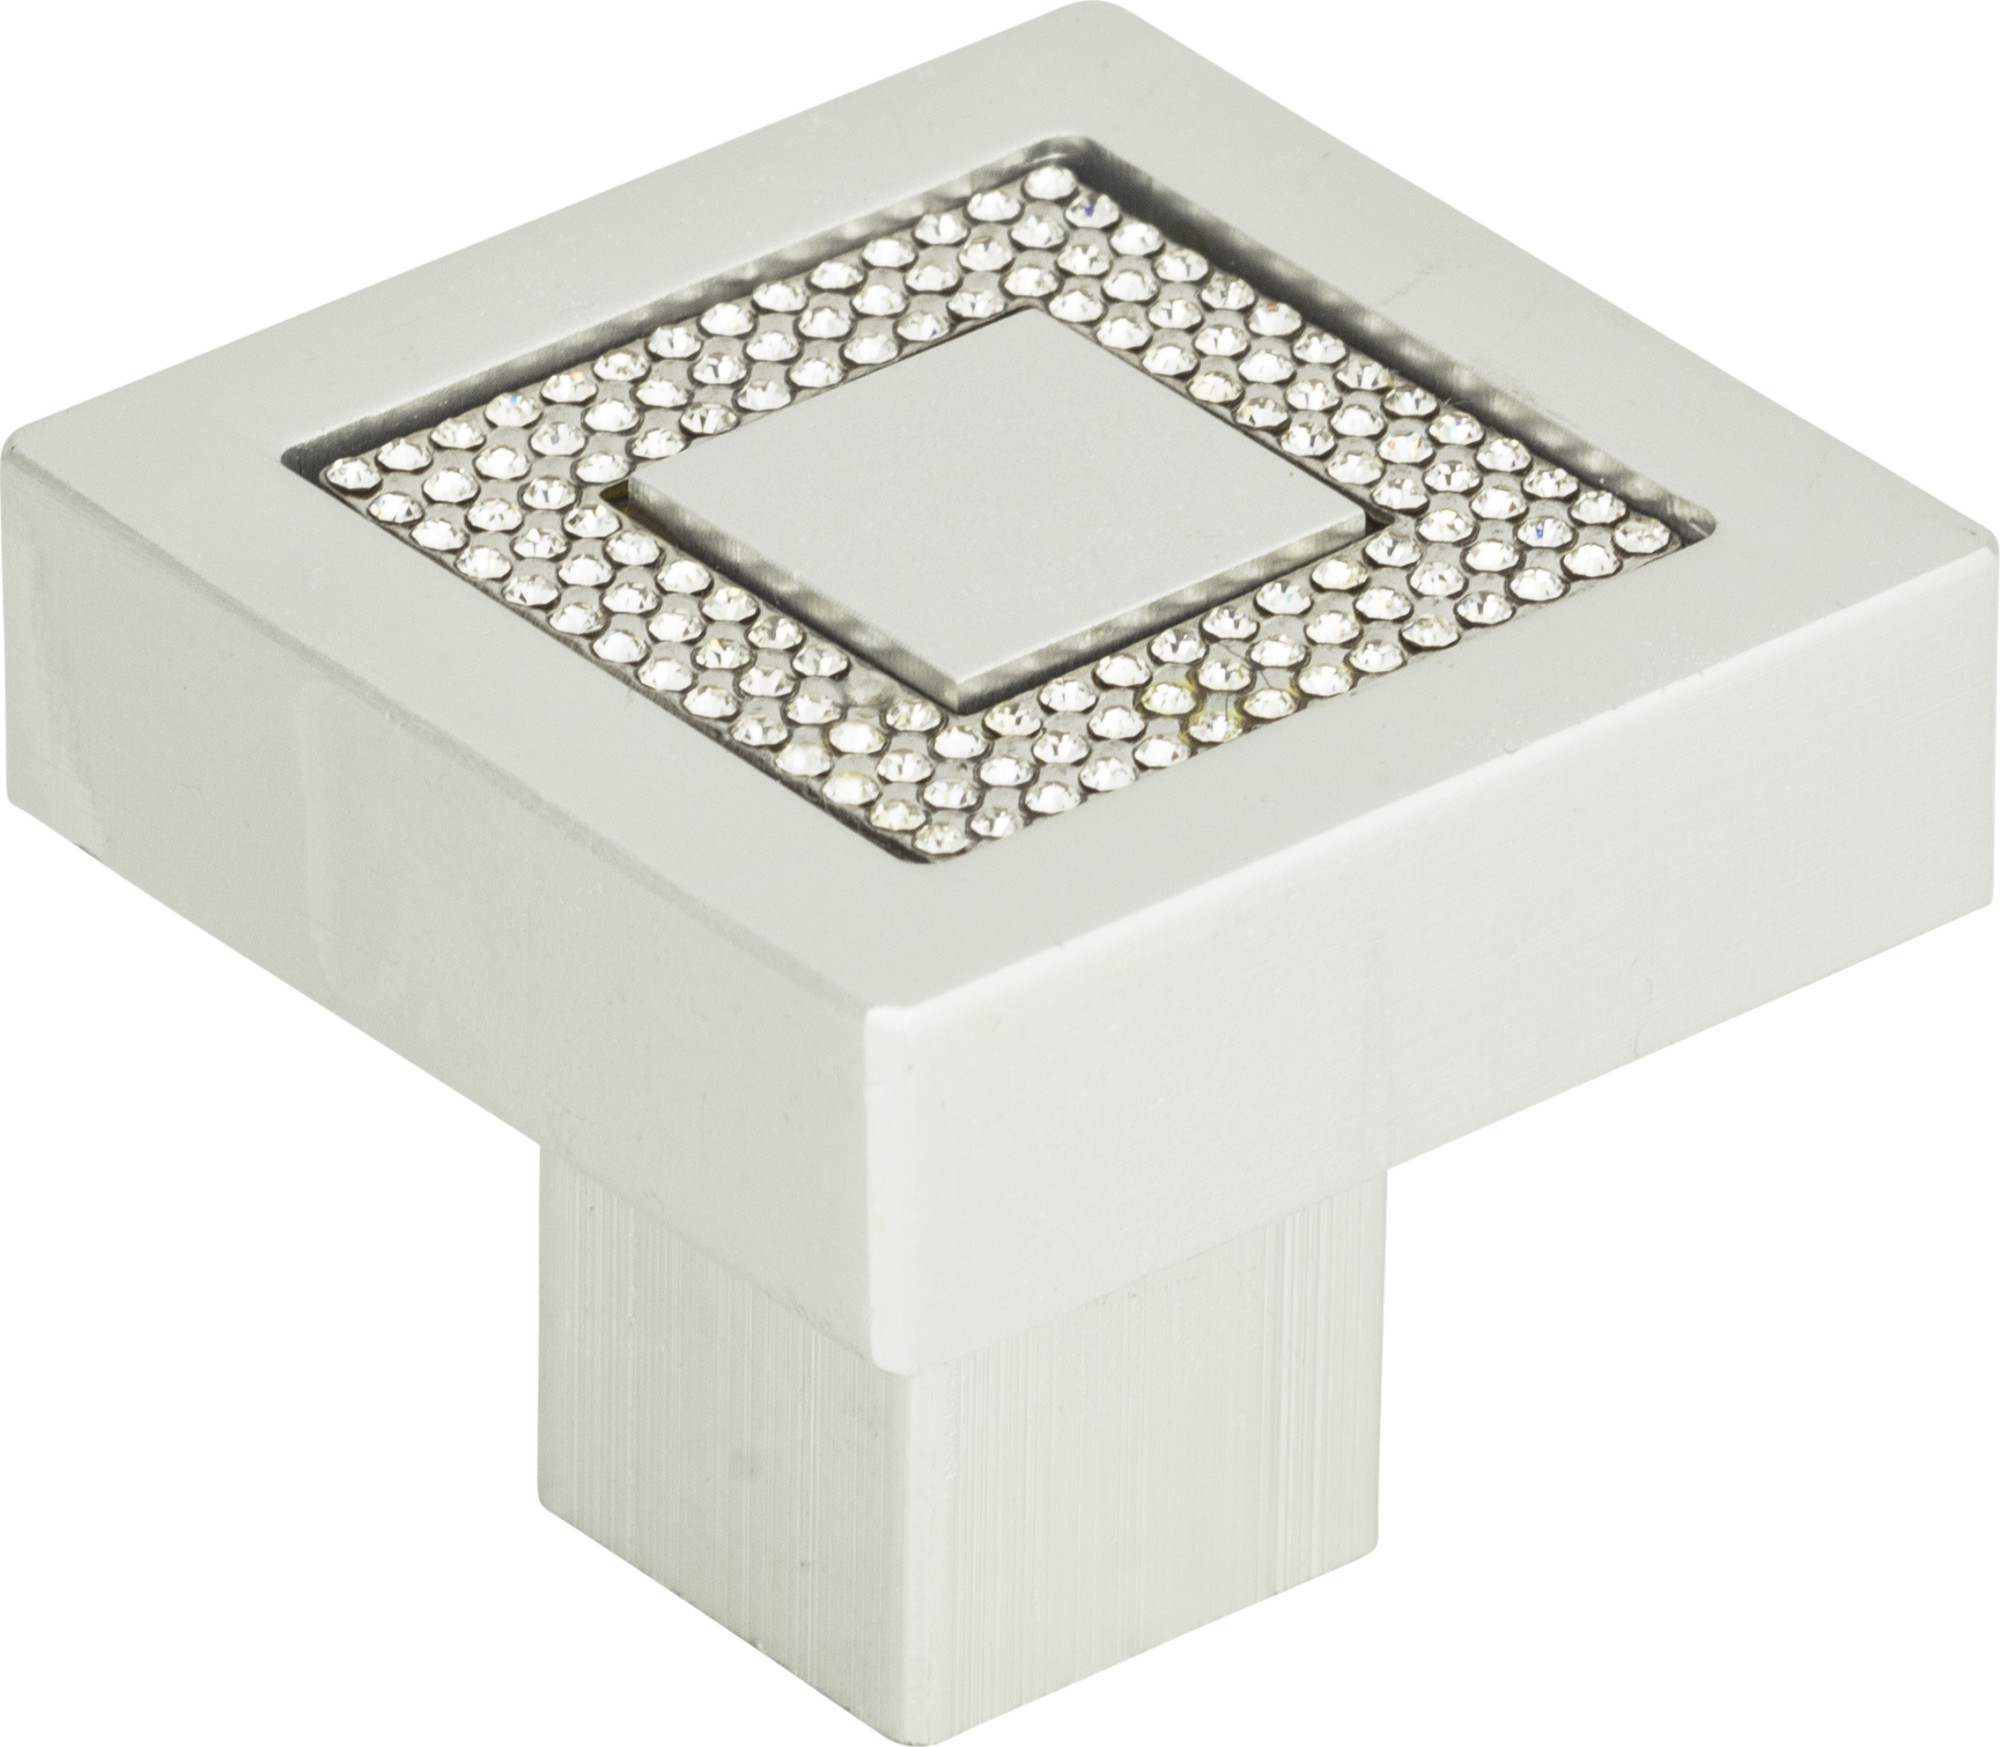 Crystal Pave 1.4 in. Square Knob - 3192-MC (Matte Chrome) - image 2 of 5